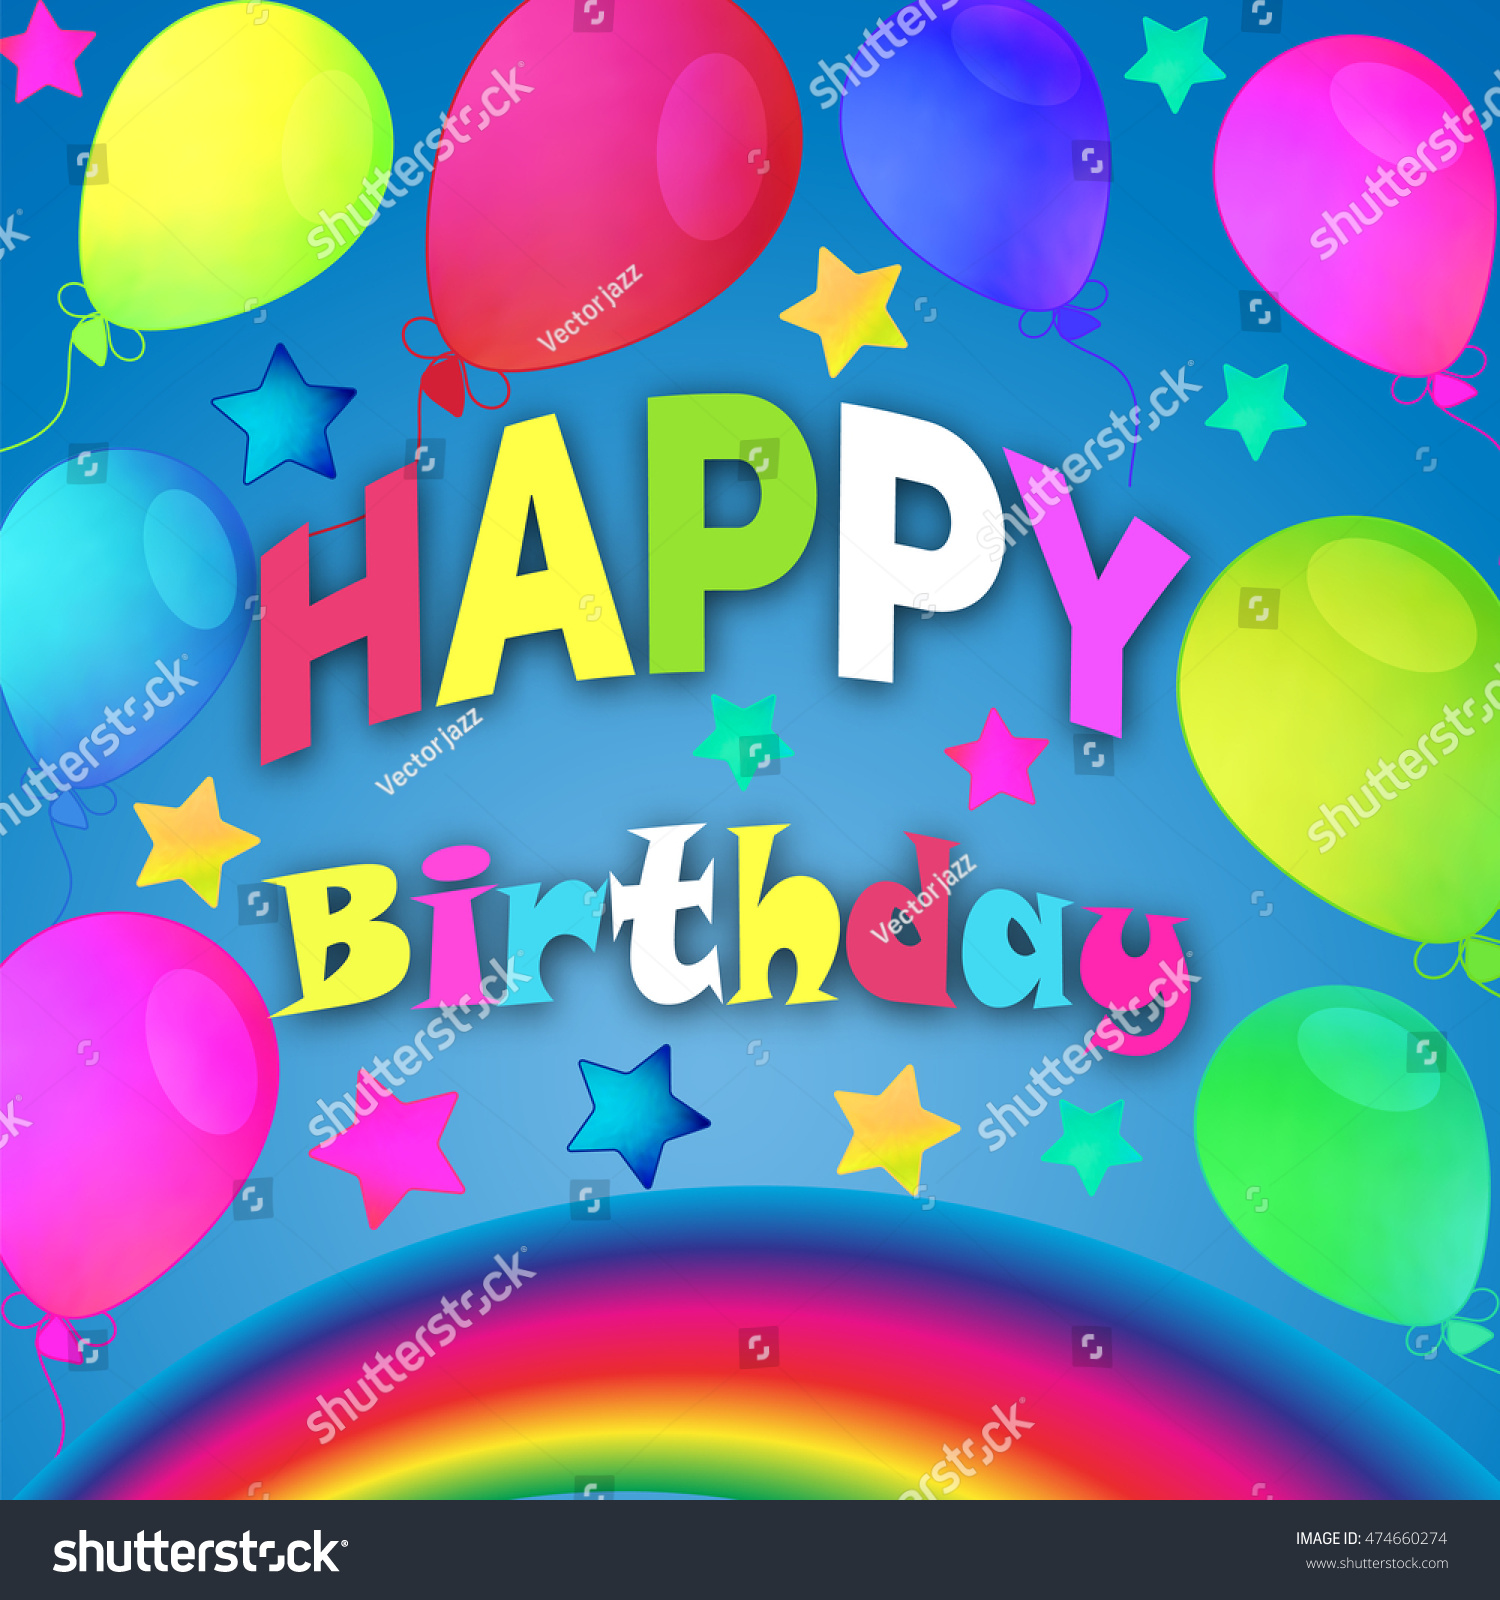 Happy Birthday Congratulation Card . The Background Is Decorated With A ...